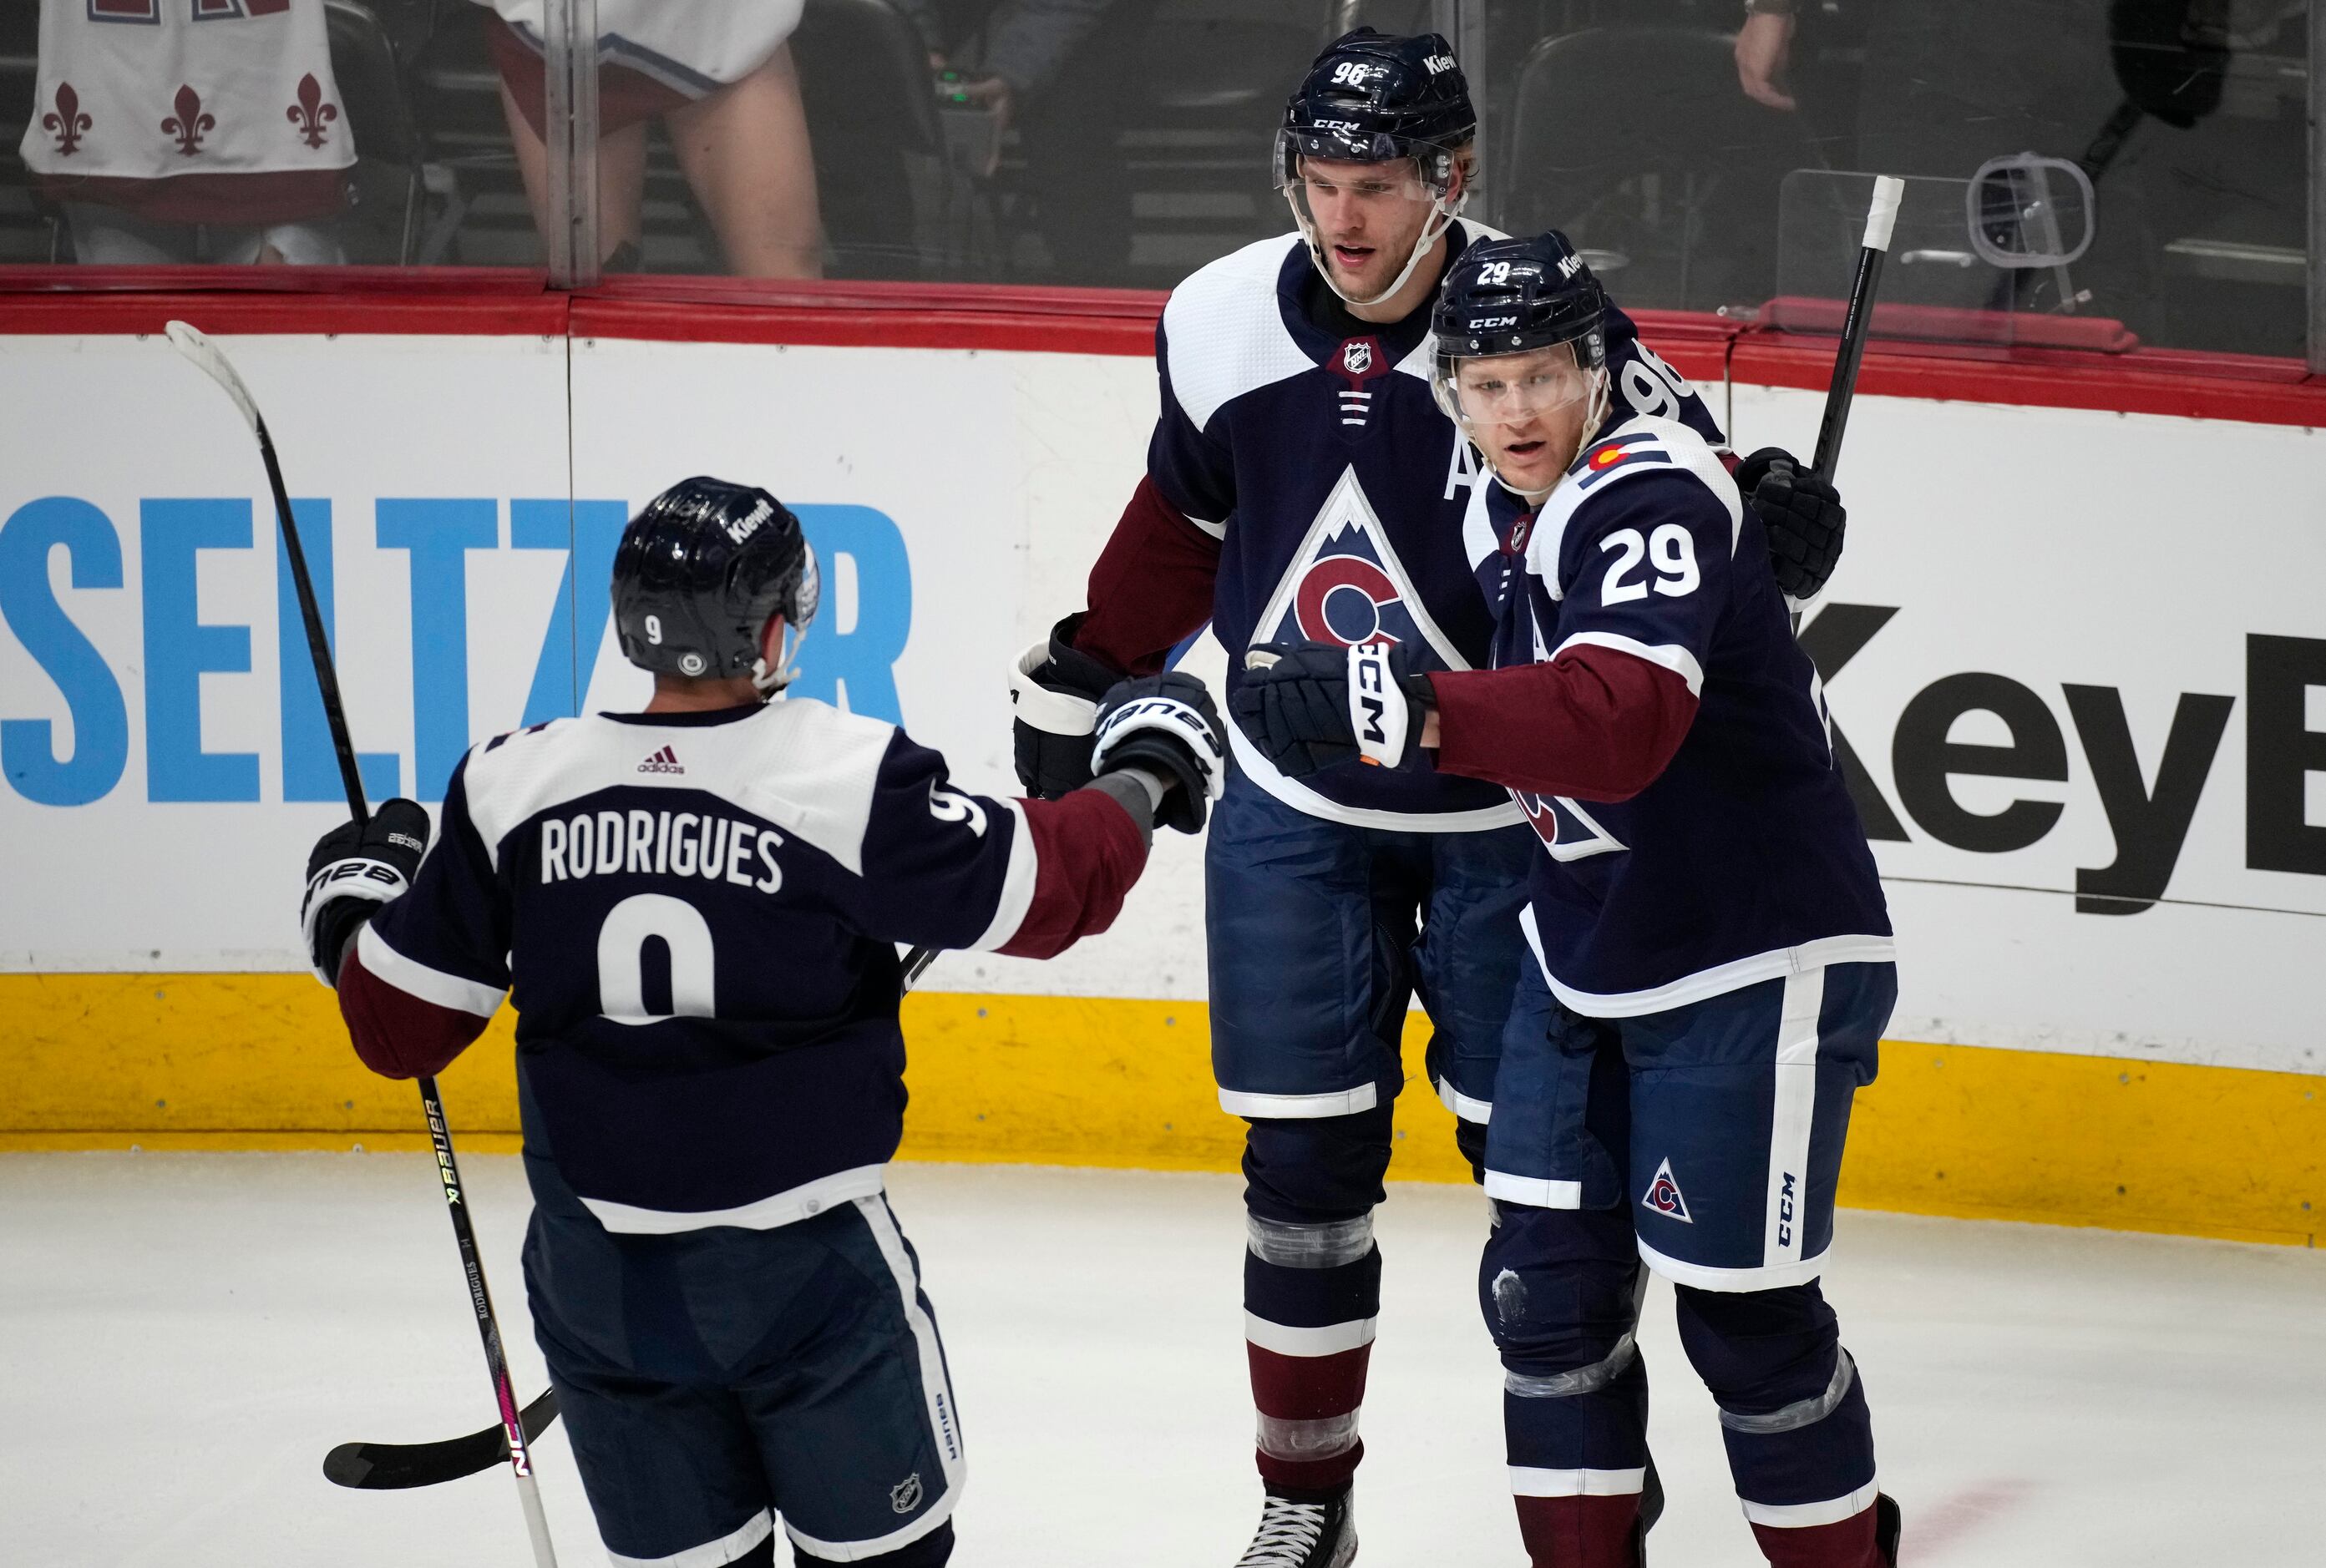 Avalanche news: Jared Bednar reacts to controversial missed call in OT